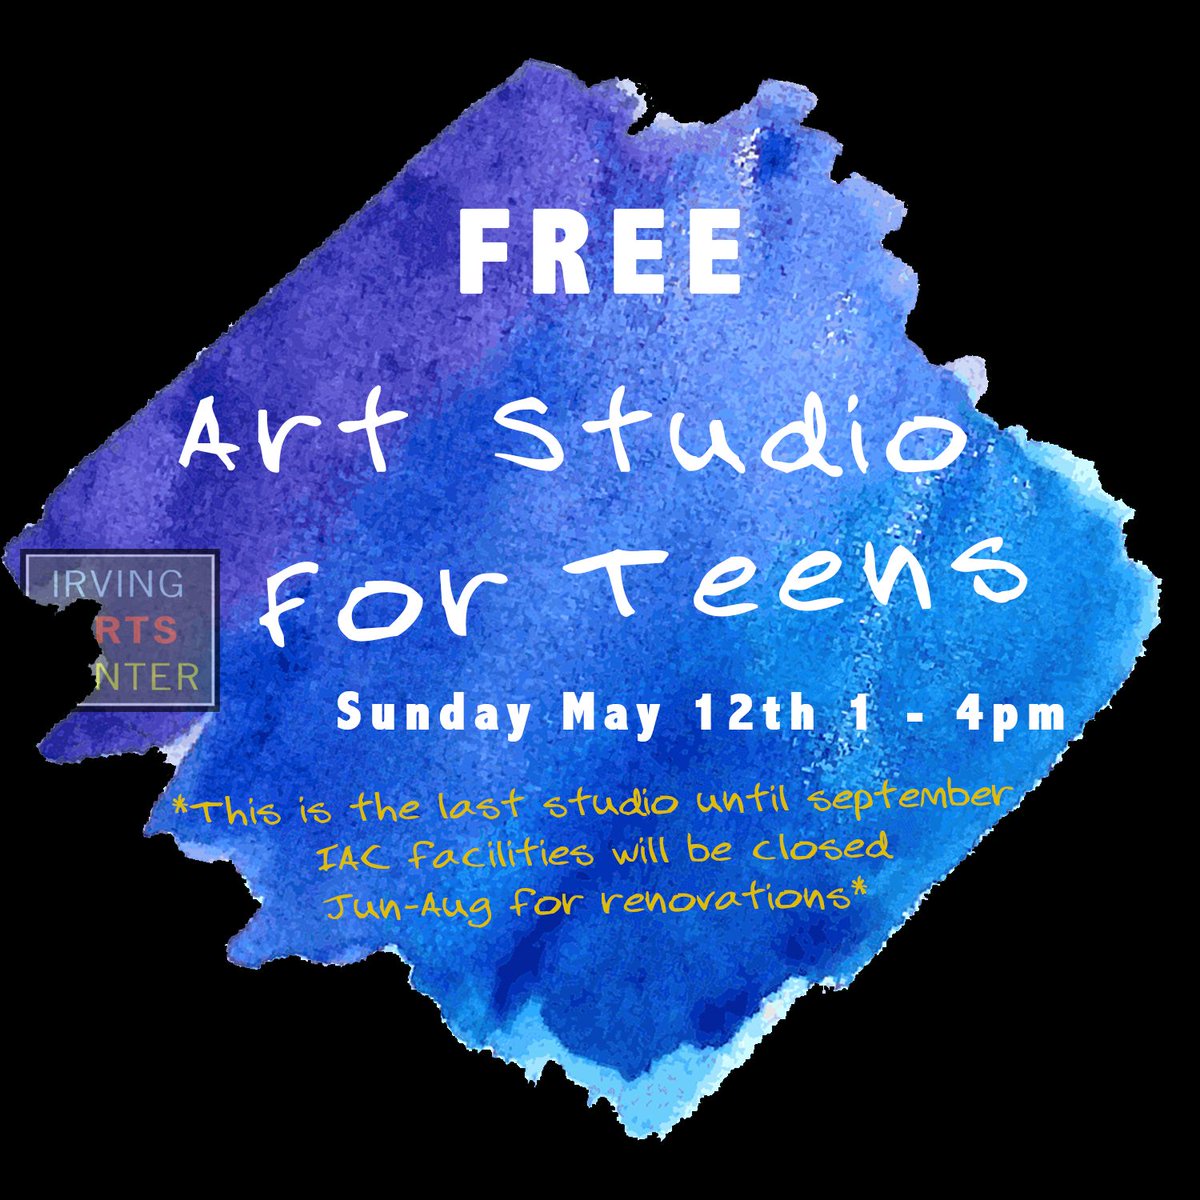 Last chance for a few months to come out and create art in a free space! Bring your projects or come and use our supplies for improvised fun! #secondsunday #teenart #artclass #freeartclasses #freeart #sundayfunday #irvingevents #irvingartscenter #irvingarts #irvingtx